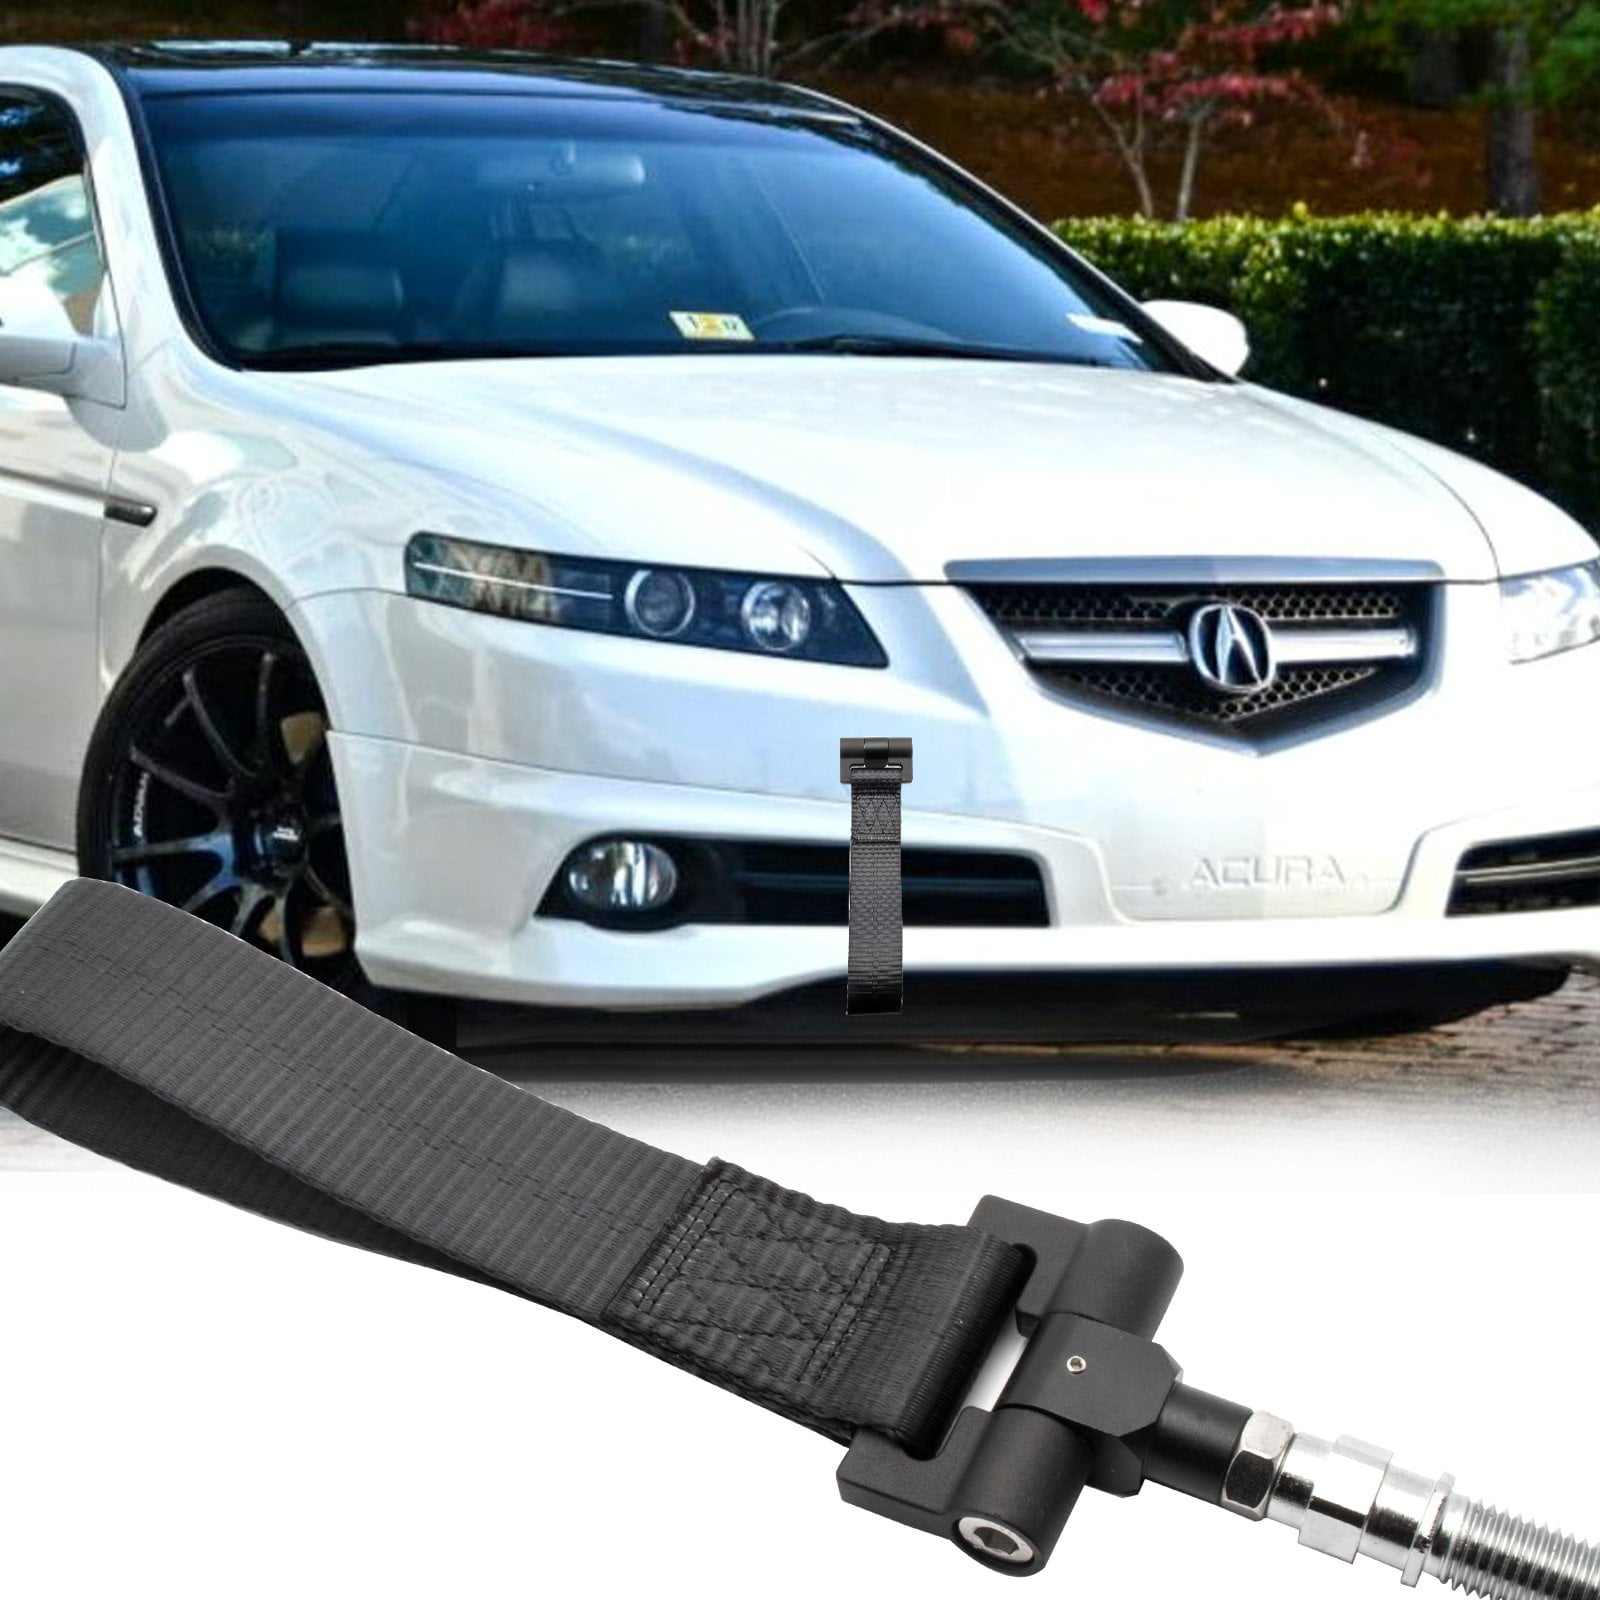 Xotic Tech Black JDM Sporty Tow Hook Adapter with Towing Strap for Honda Fit Acura TL 